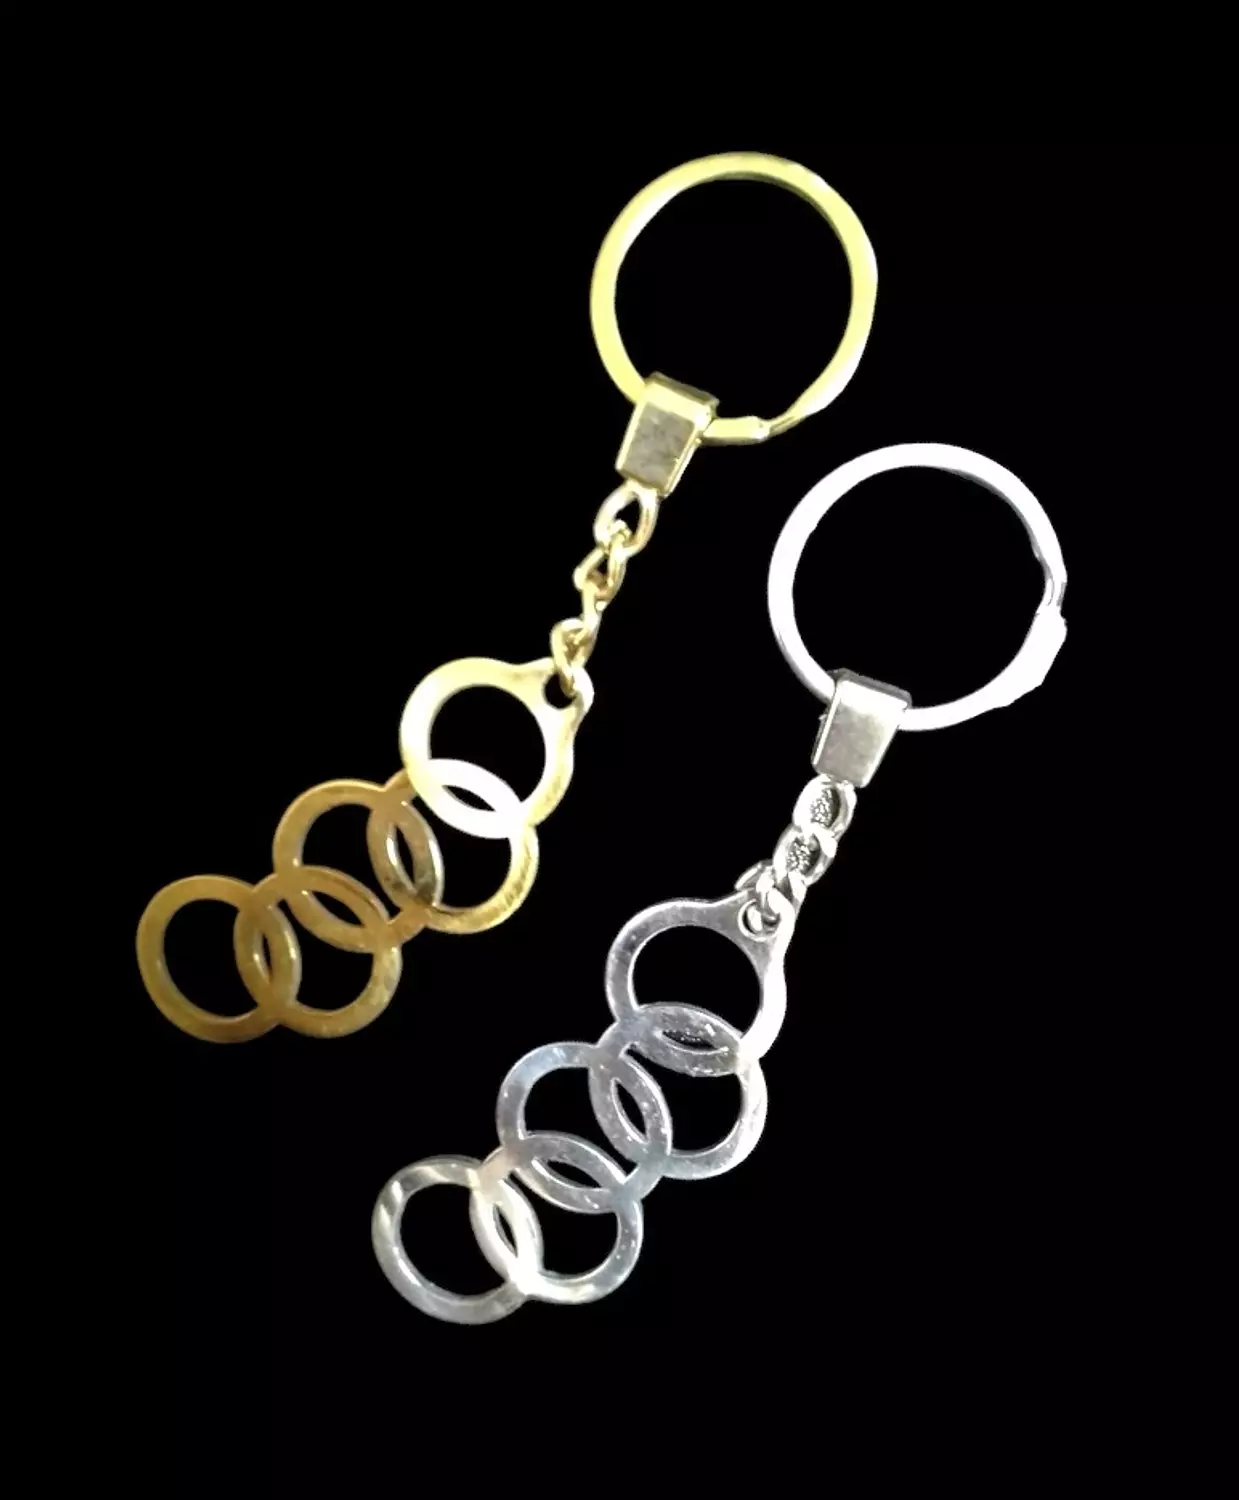 Key Chain | Olympics hover image